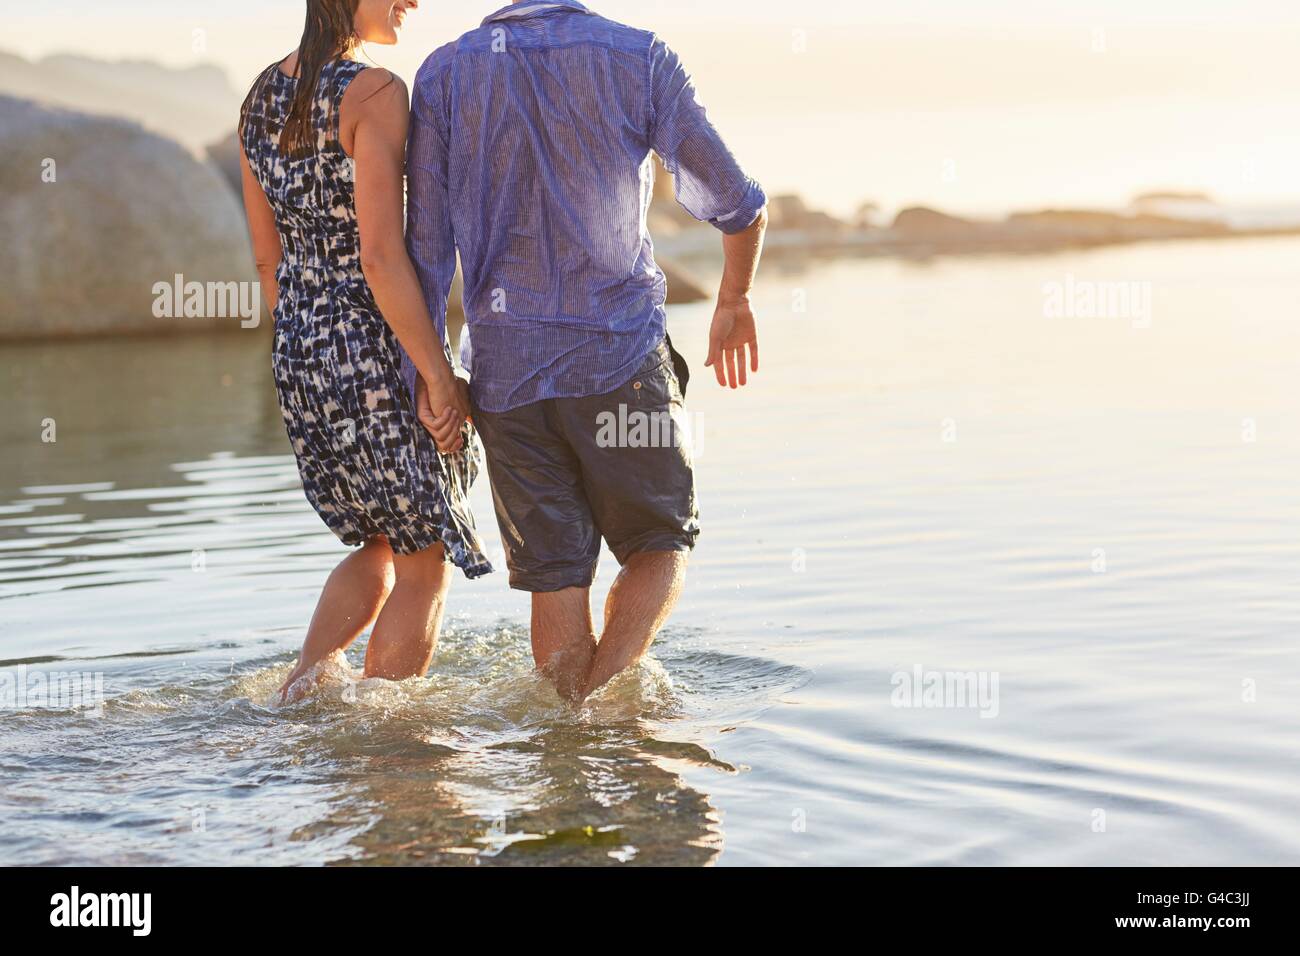 MODEL RELEASED. Couple paddling in the sea. Stock Photo